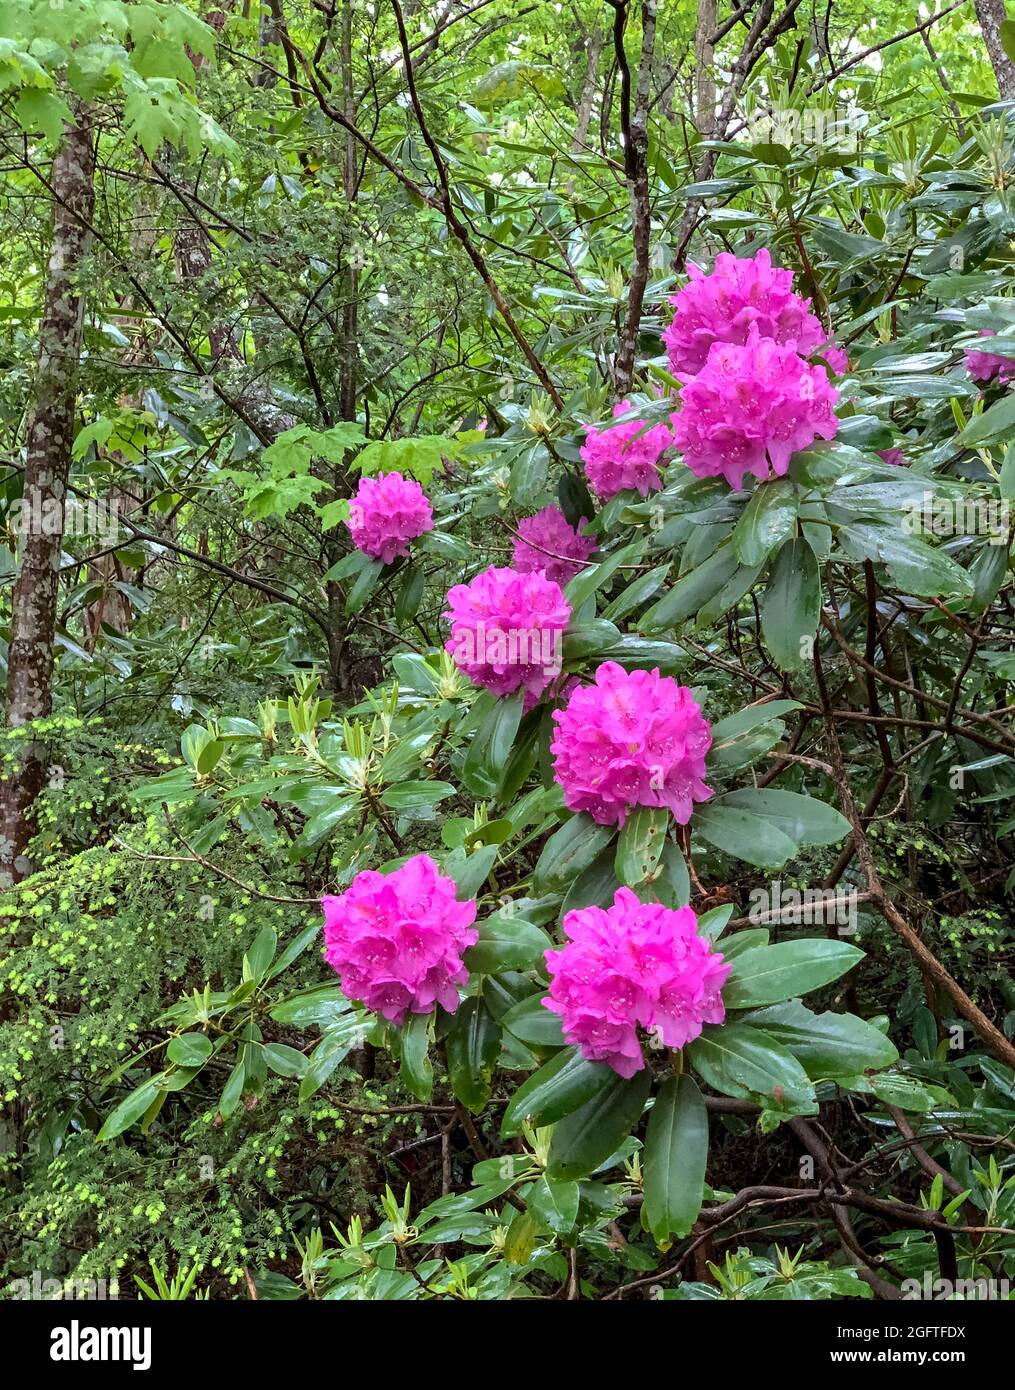 Virginie occidentale, parc national de New River gorge. Rhododendron sur l'interminable Wall Trail. Banque D'Images